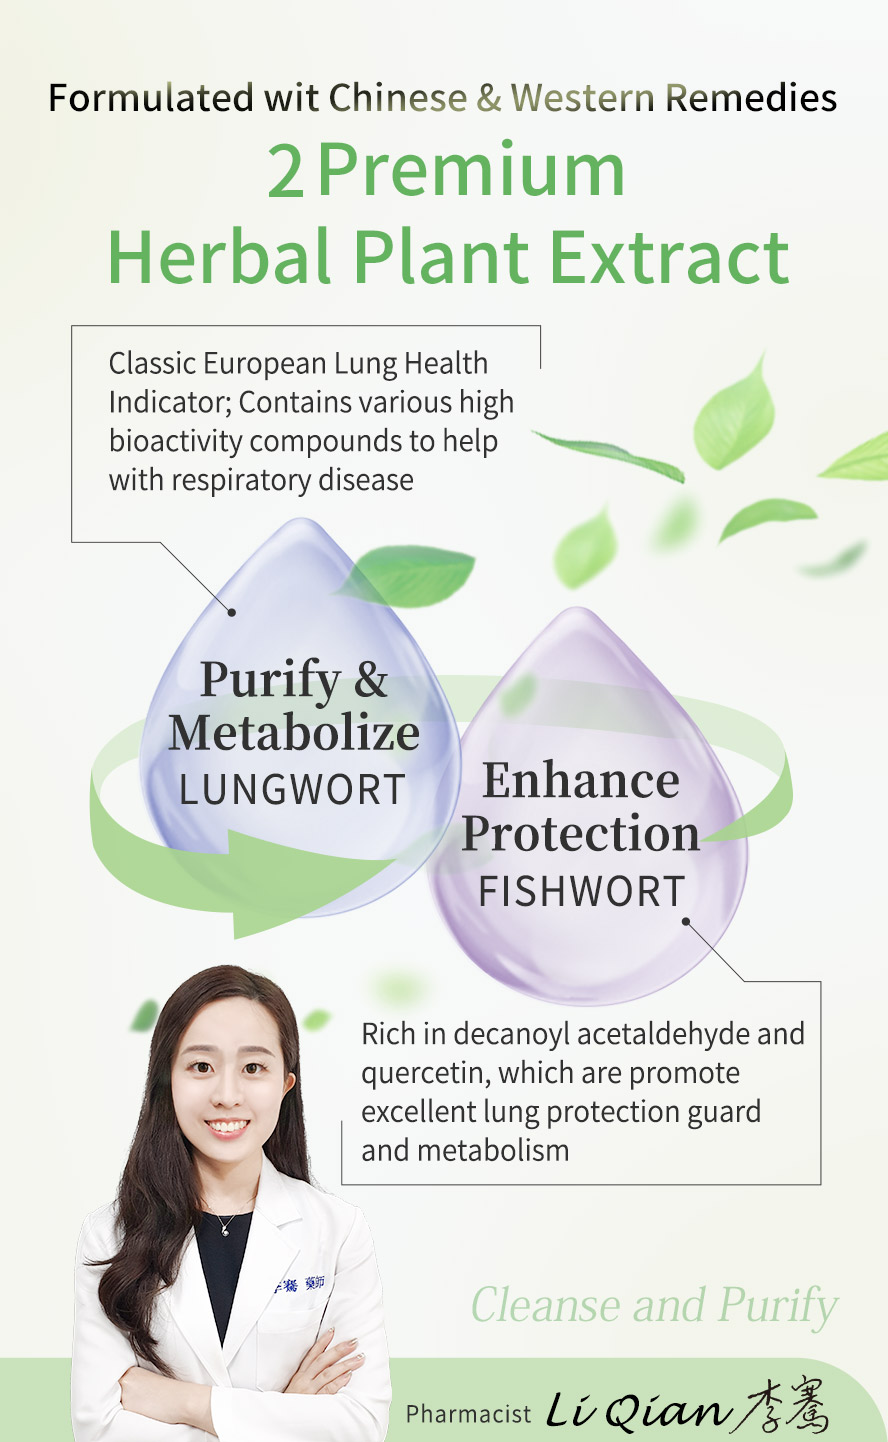 BHK's Lungwort Extract can protect lungs and help with preventing respiratory disease which is highly recommended by pharmacist.